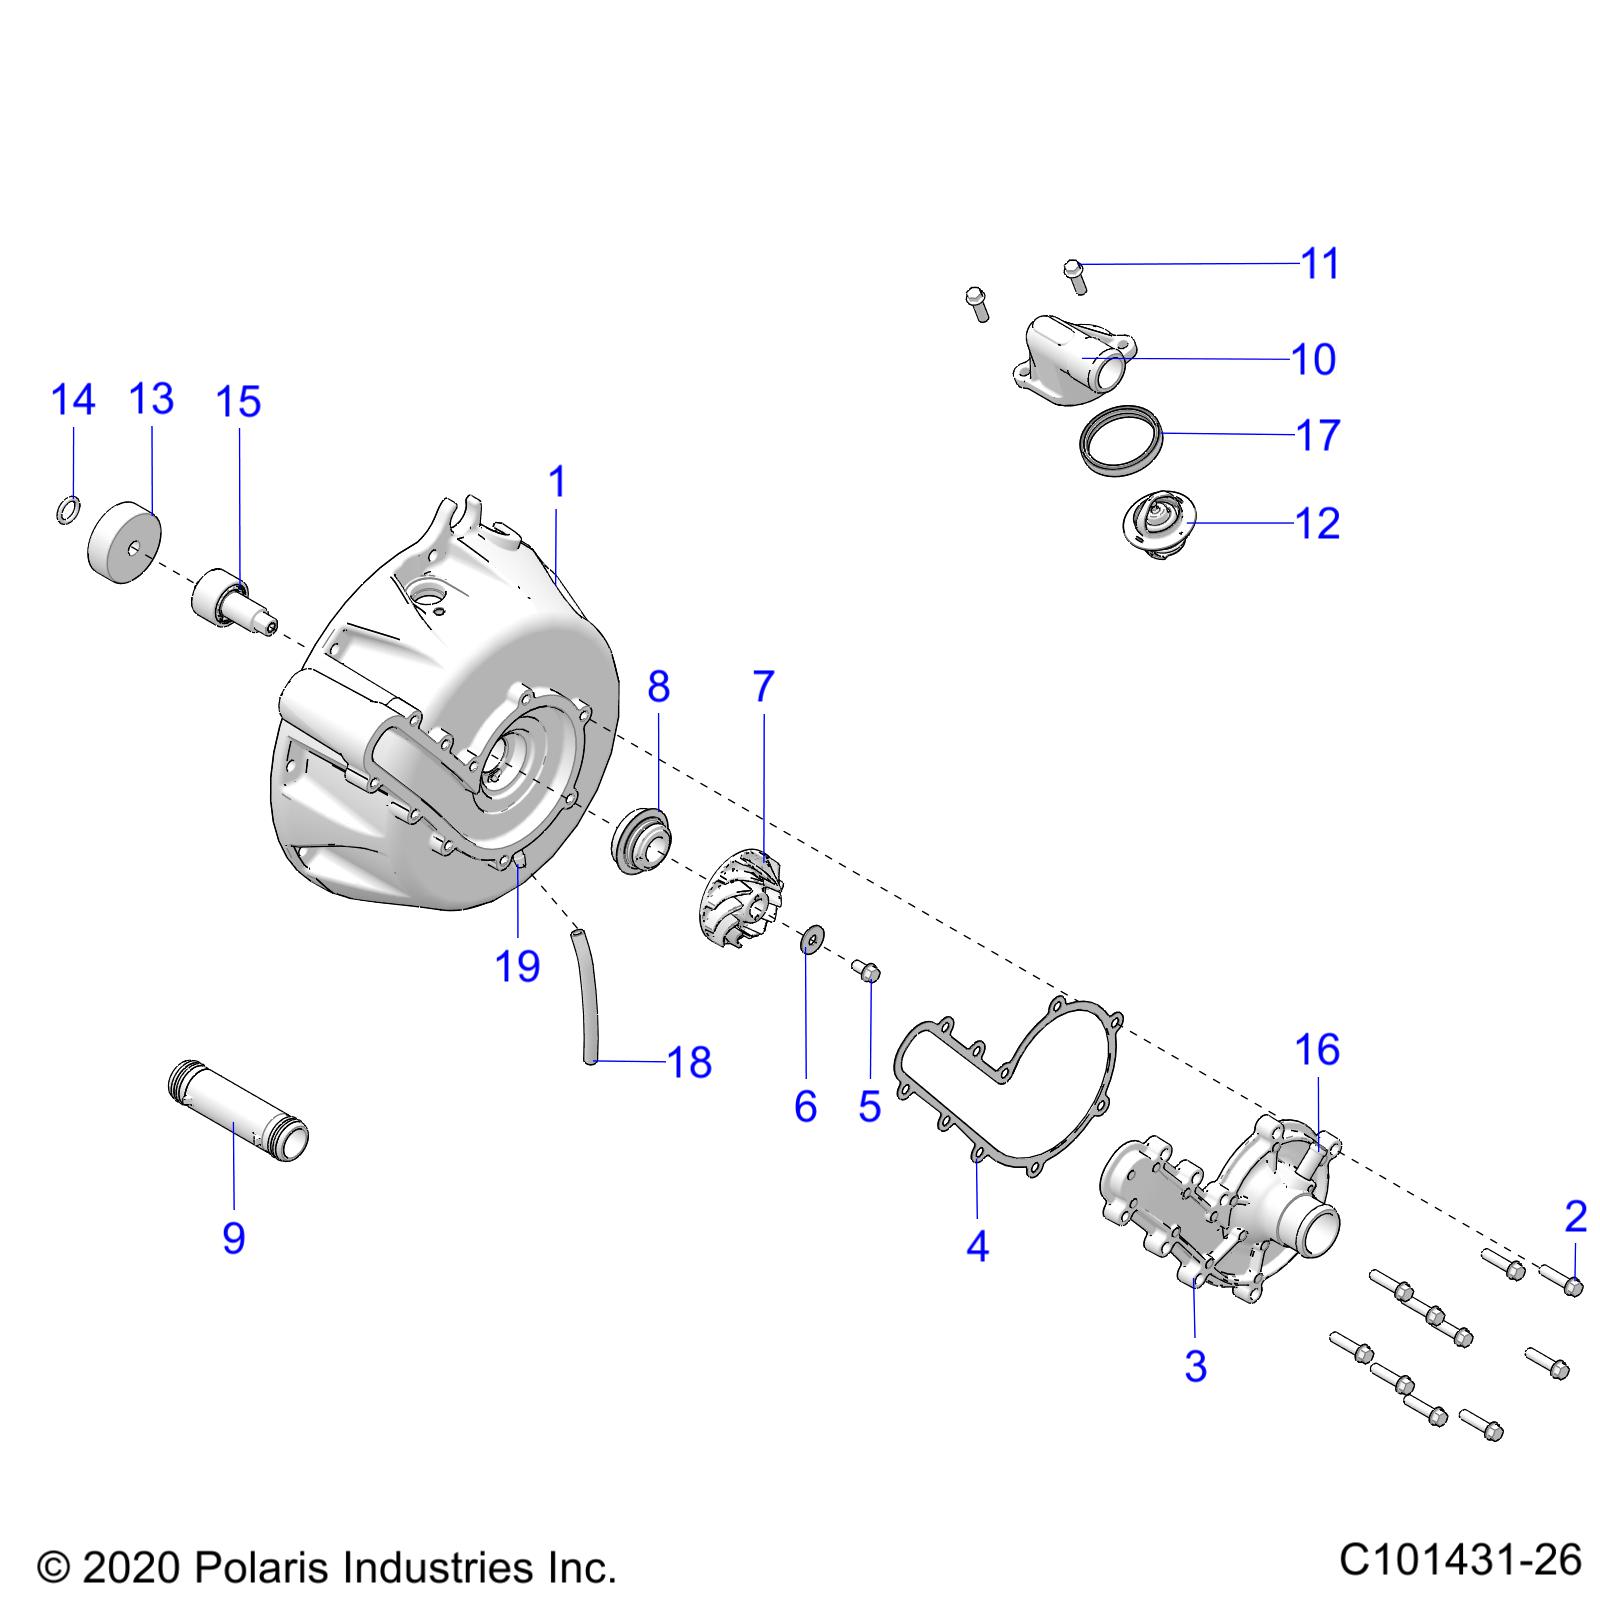 Part Number : 7052511 FITTING-COOLANT 3/8